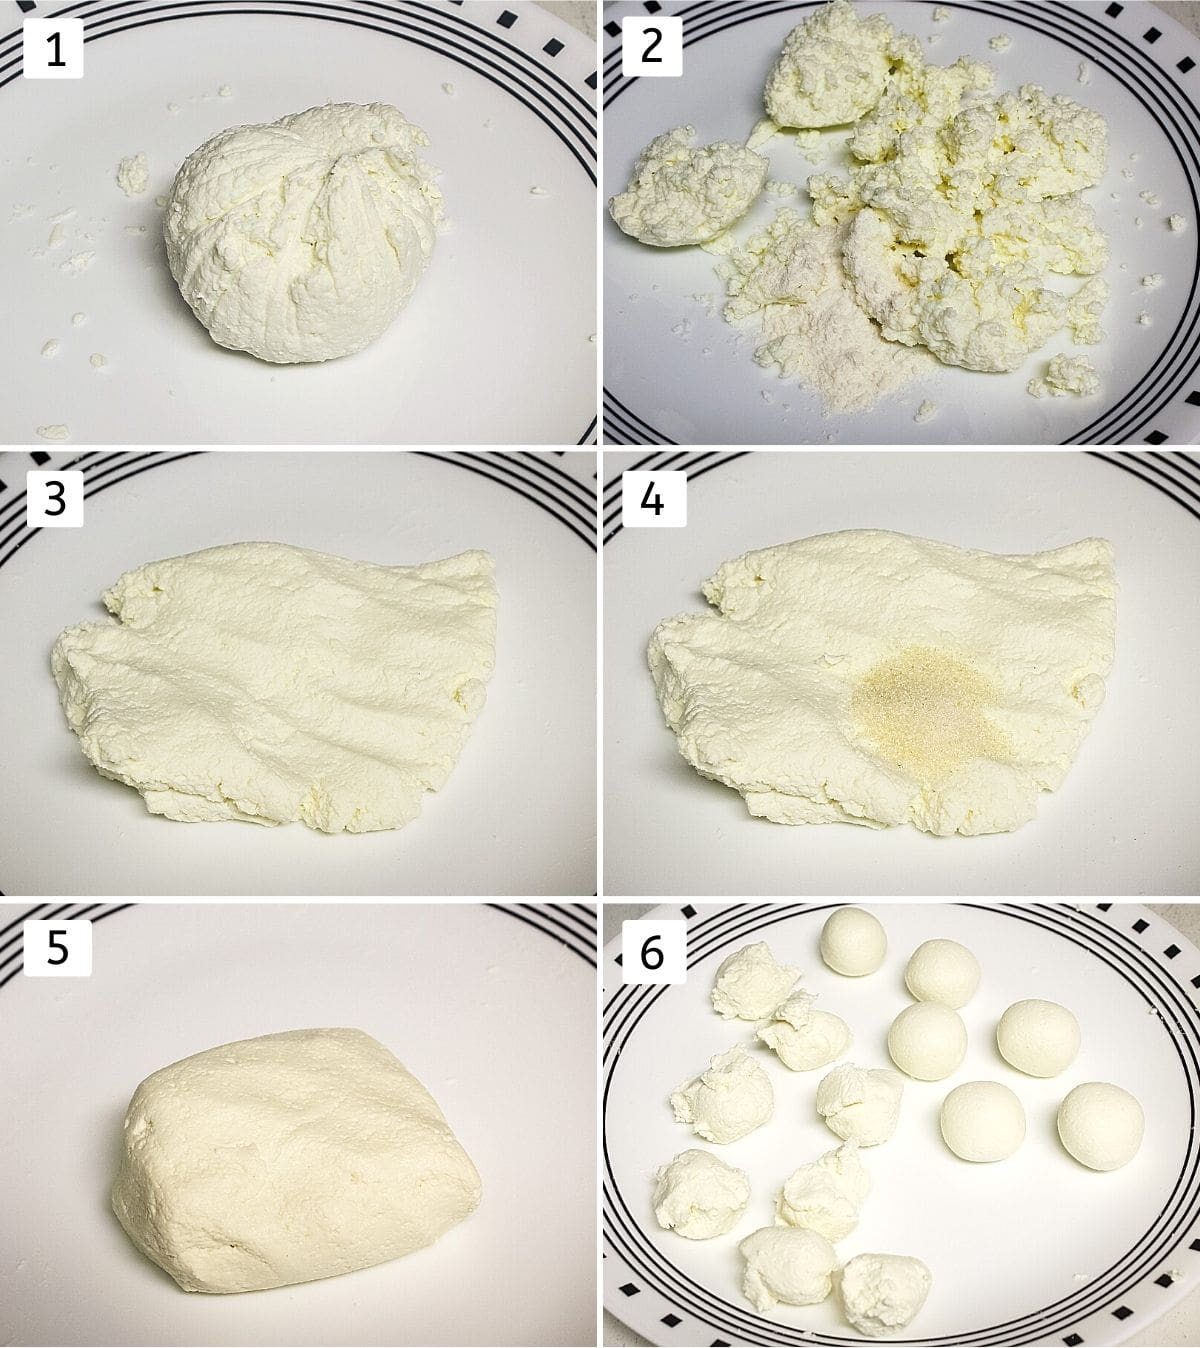 Collage of 6 images showing chenna ball, crumbled, kneaded chenna, adding sugar, dough ball and small balls